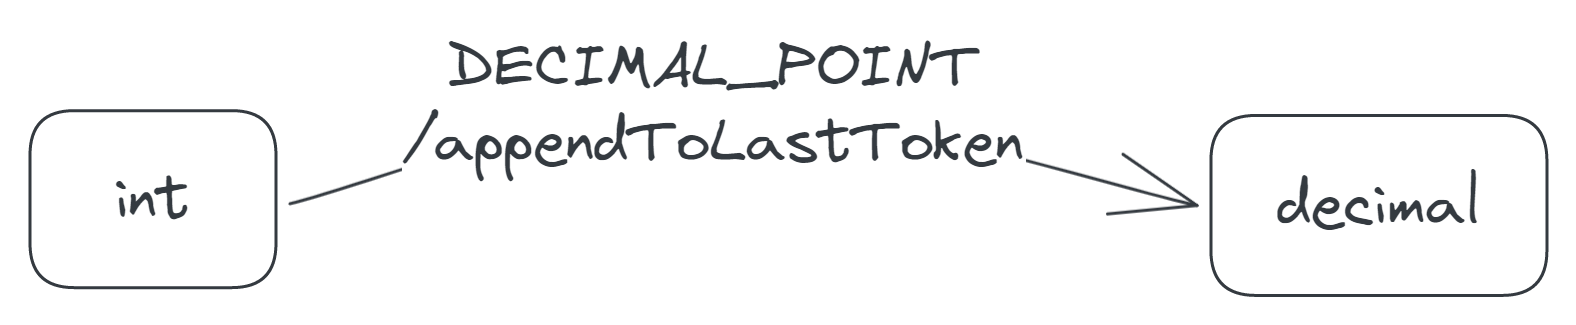 A transition labelled 'DECIMAL_POINT/appendToLastToken', from the int to the decimal state.